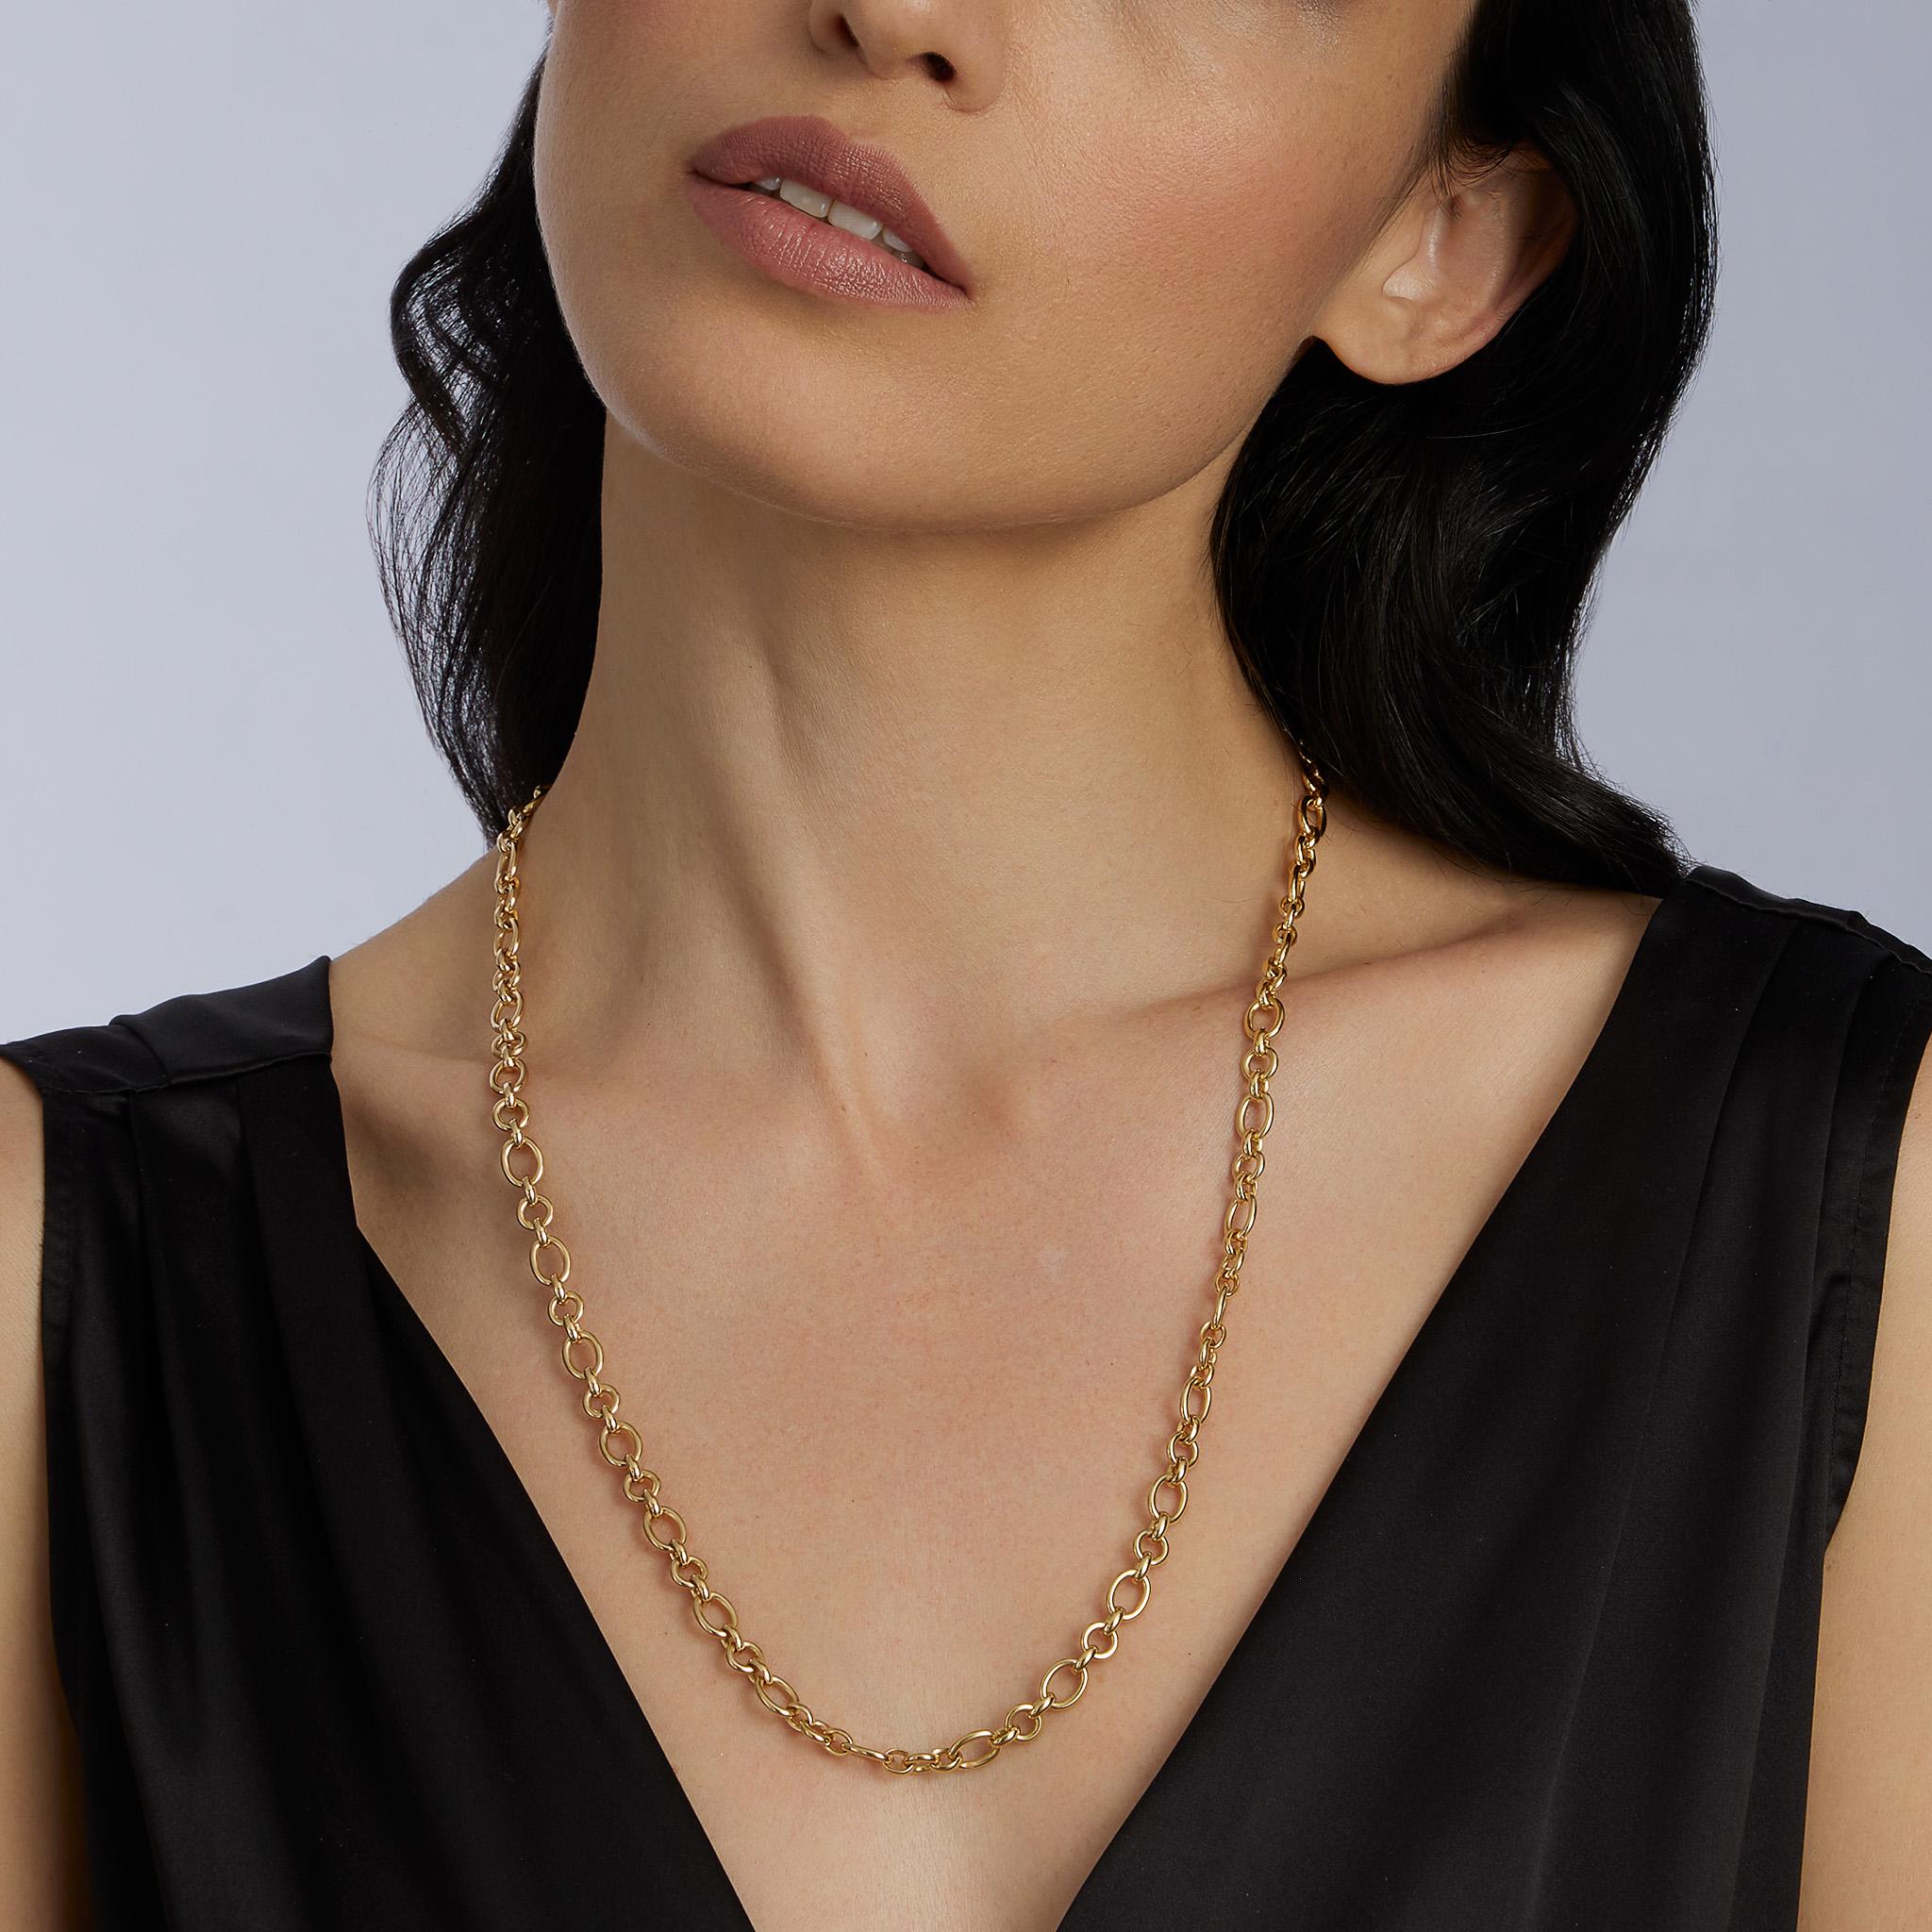 Created in the late 20th century, this 18K gold anchor chain necklace by Cartier is composed of yellow gold anchor chain links. This casual, contemporary piece is a classic form with a Cartier twist.

Product Details: 
Item #: N-20797
Artist: